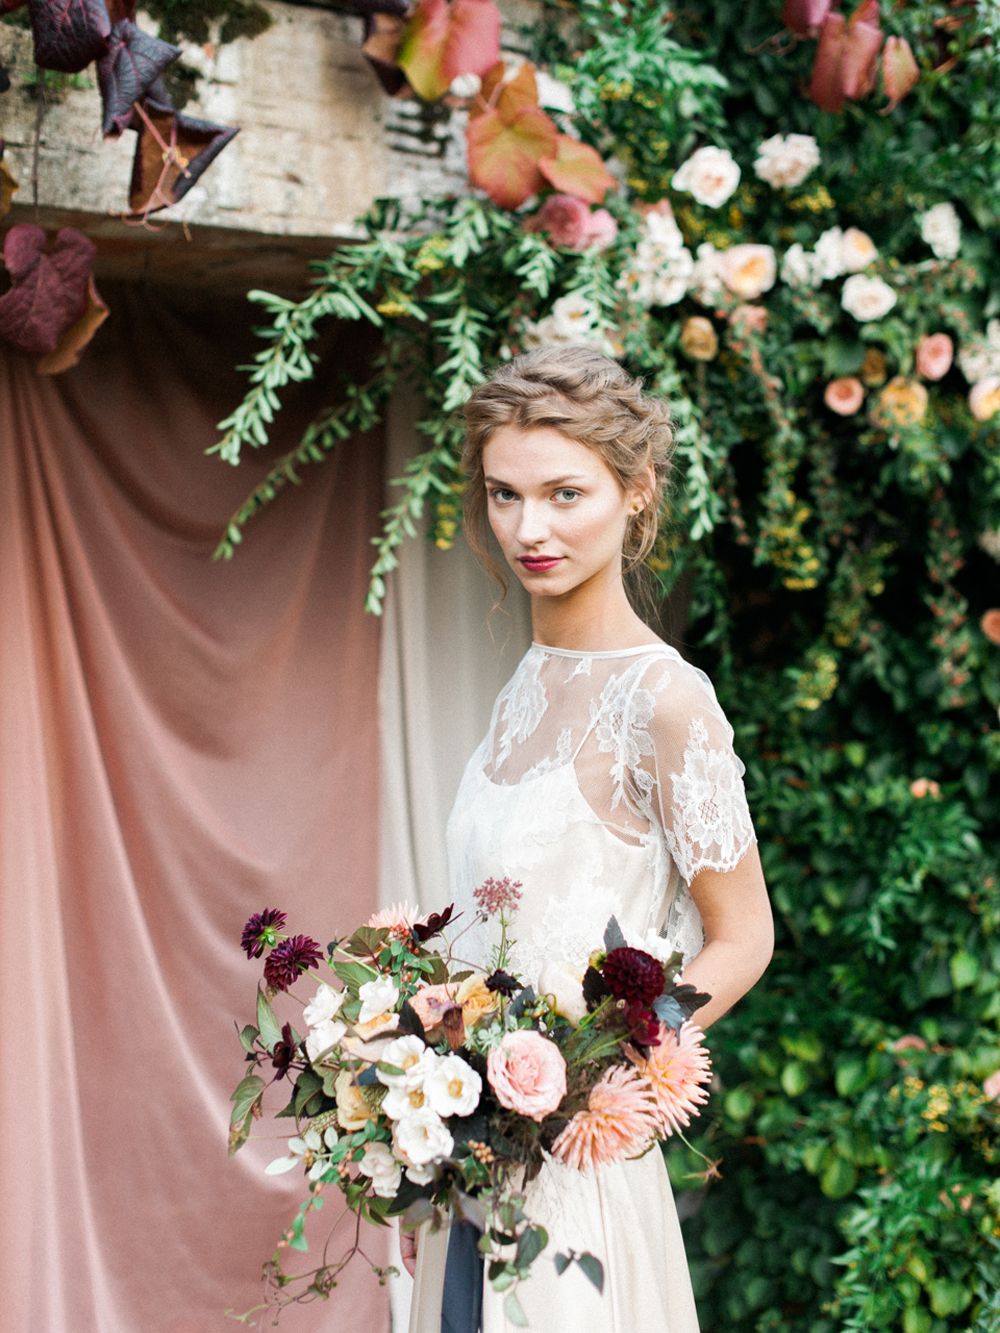 Voewood Wedding Inspiration Shoot Styled by Knot & Pop Halfpenny London ...